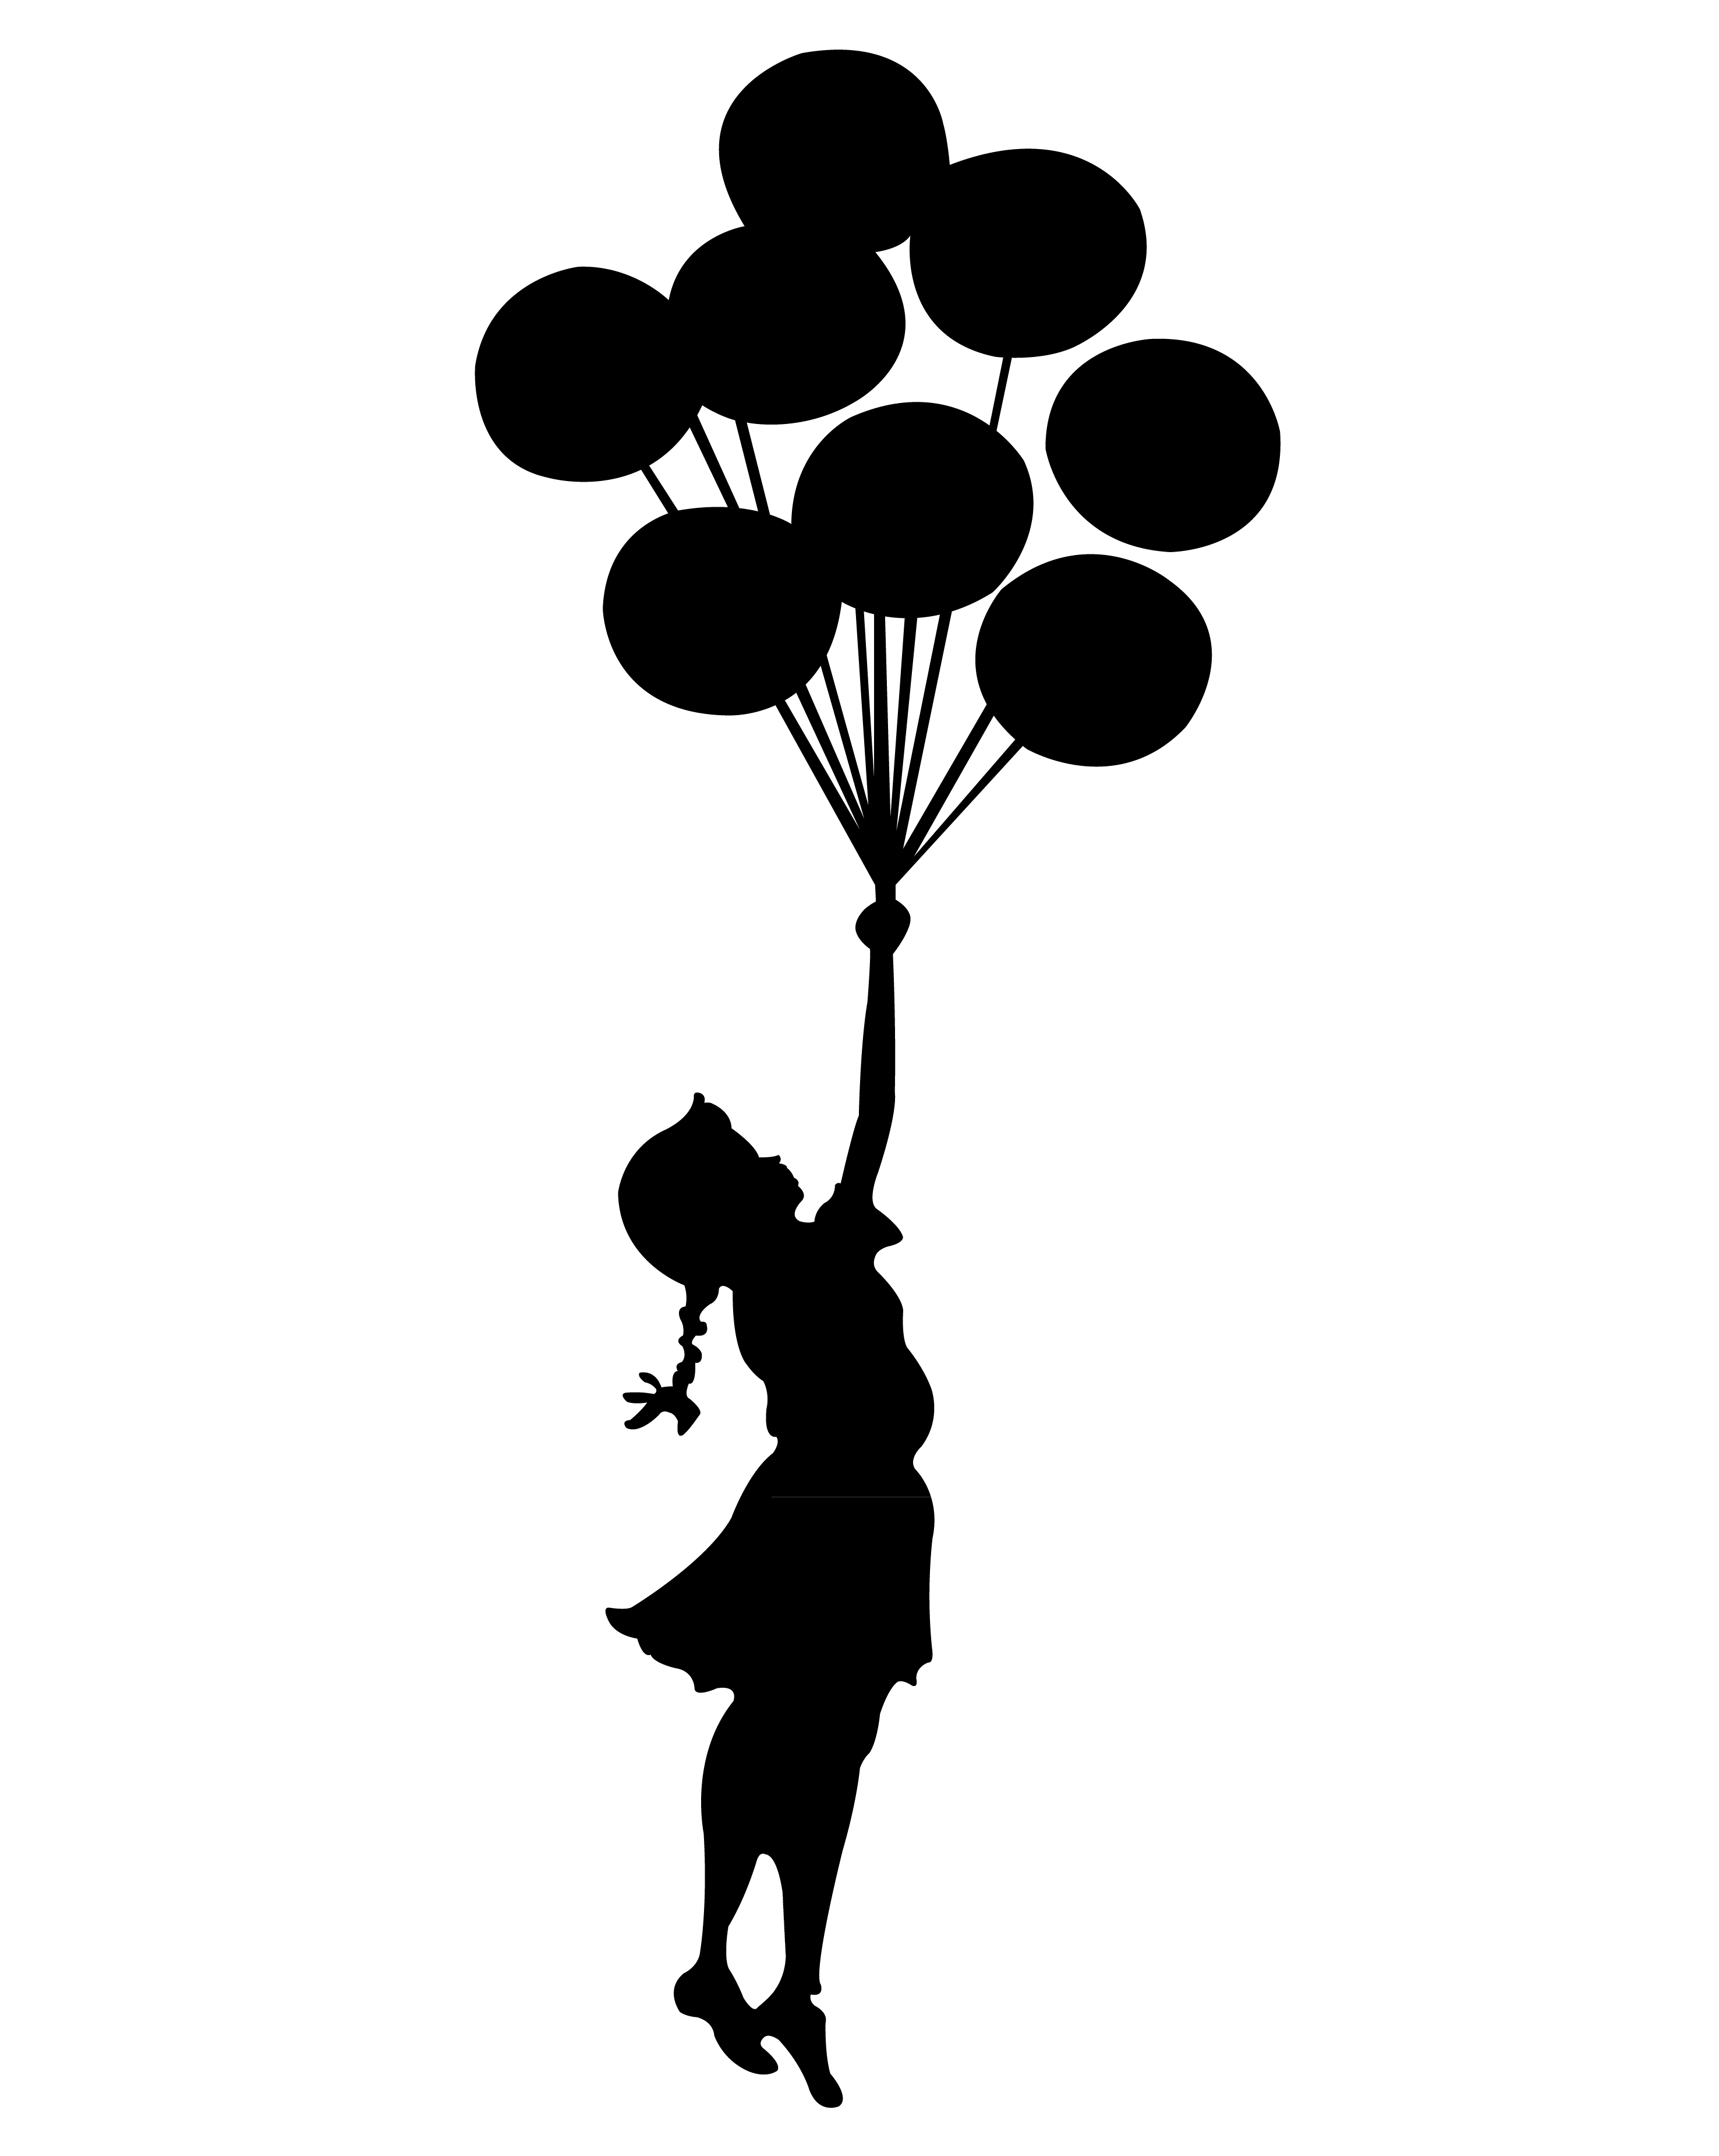 Child With Balloon Silhouette at GetDrawings | Free download Dancing With Umbrella Silhouette